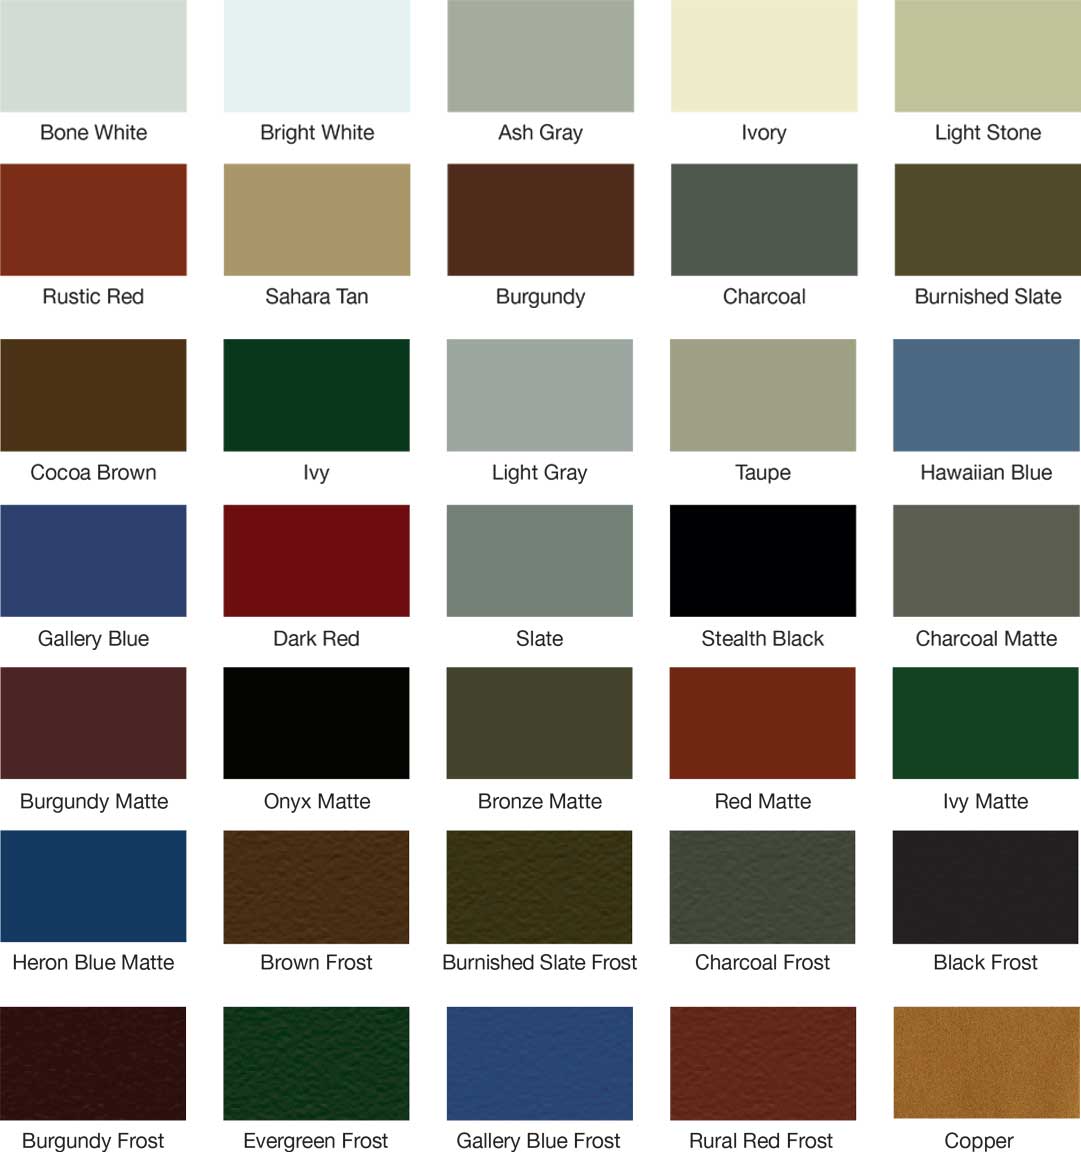 Metal roofing color swatches